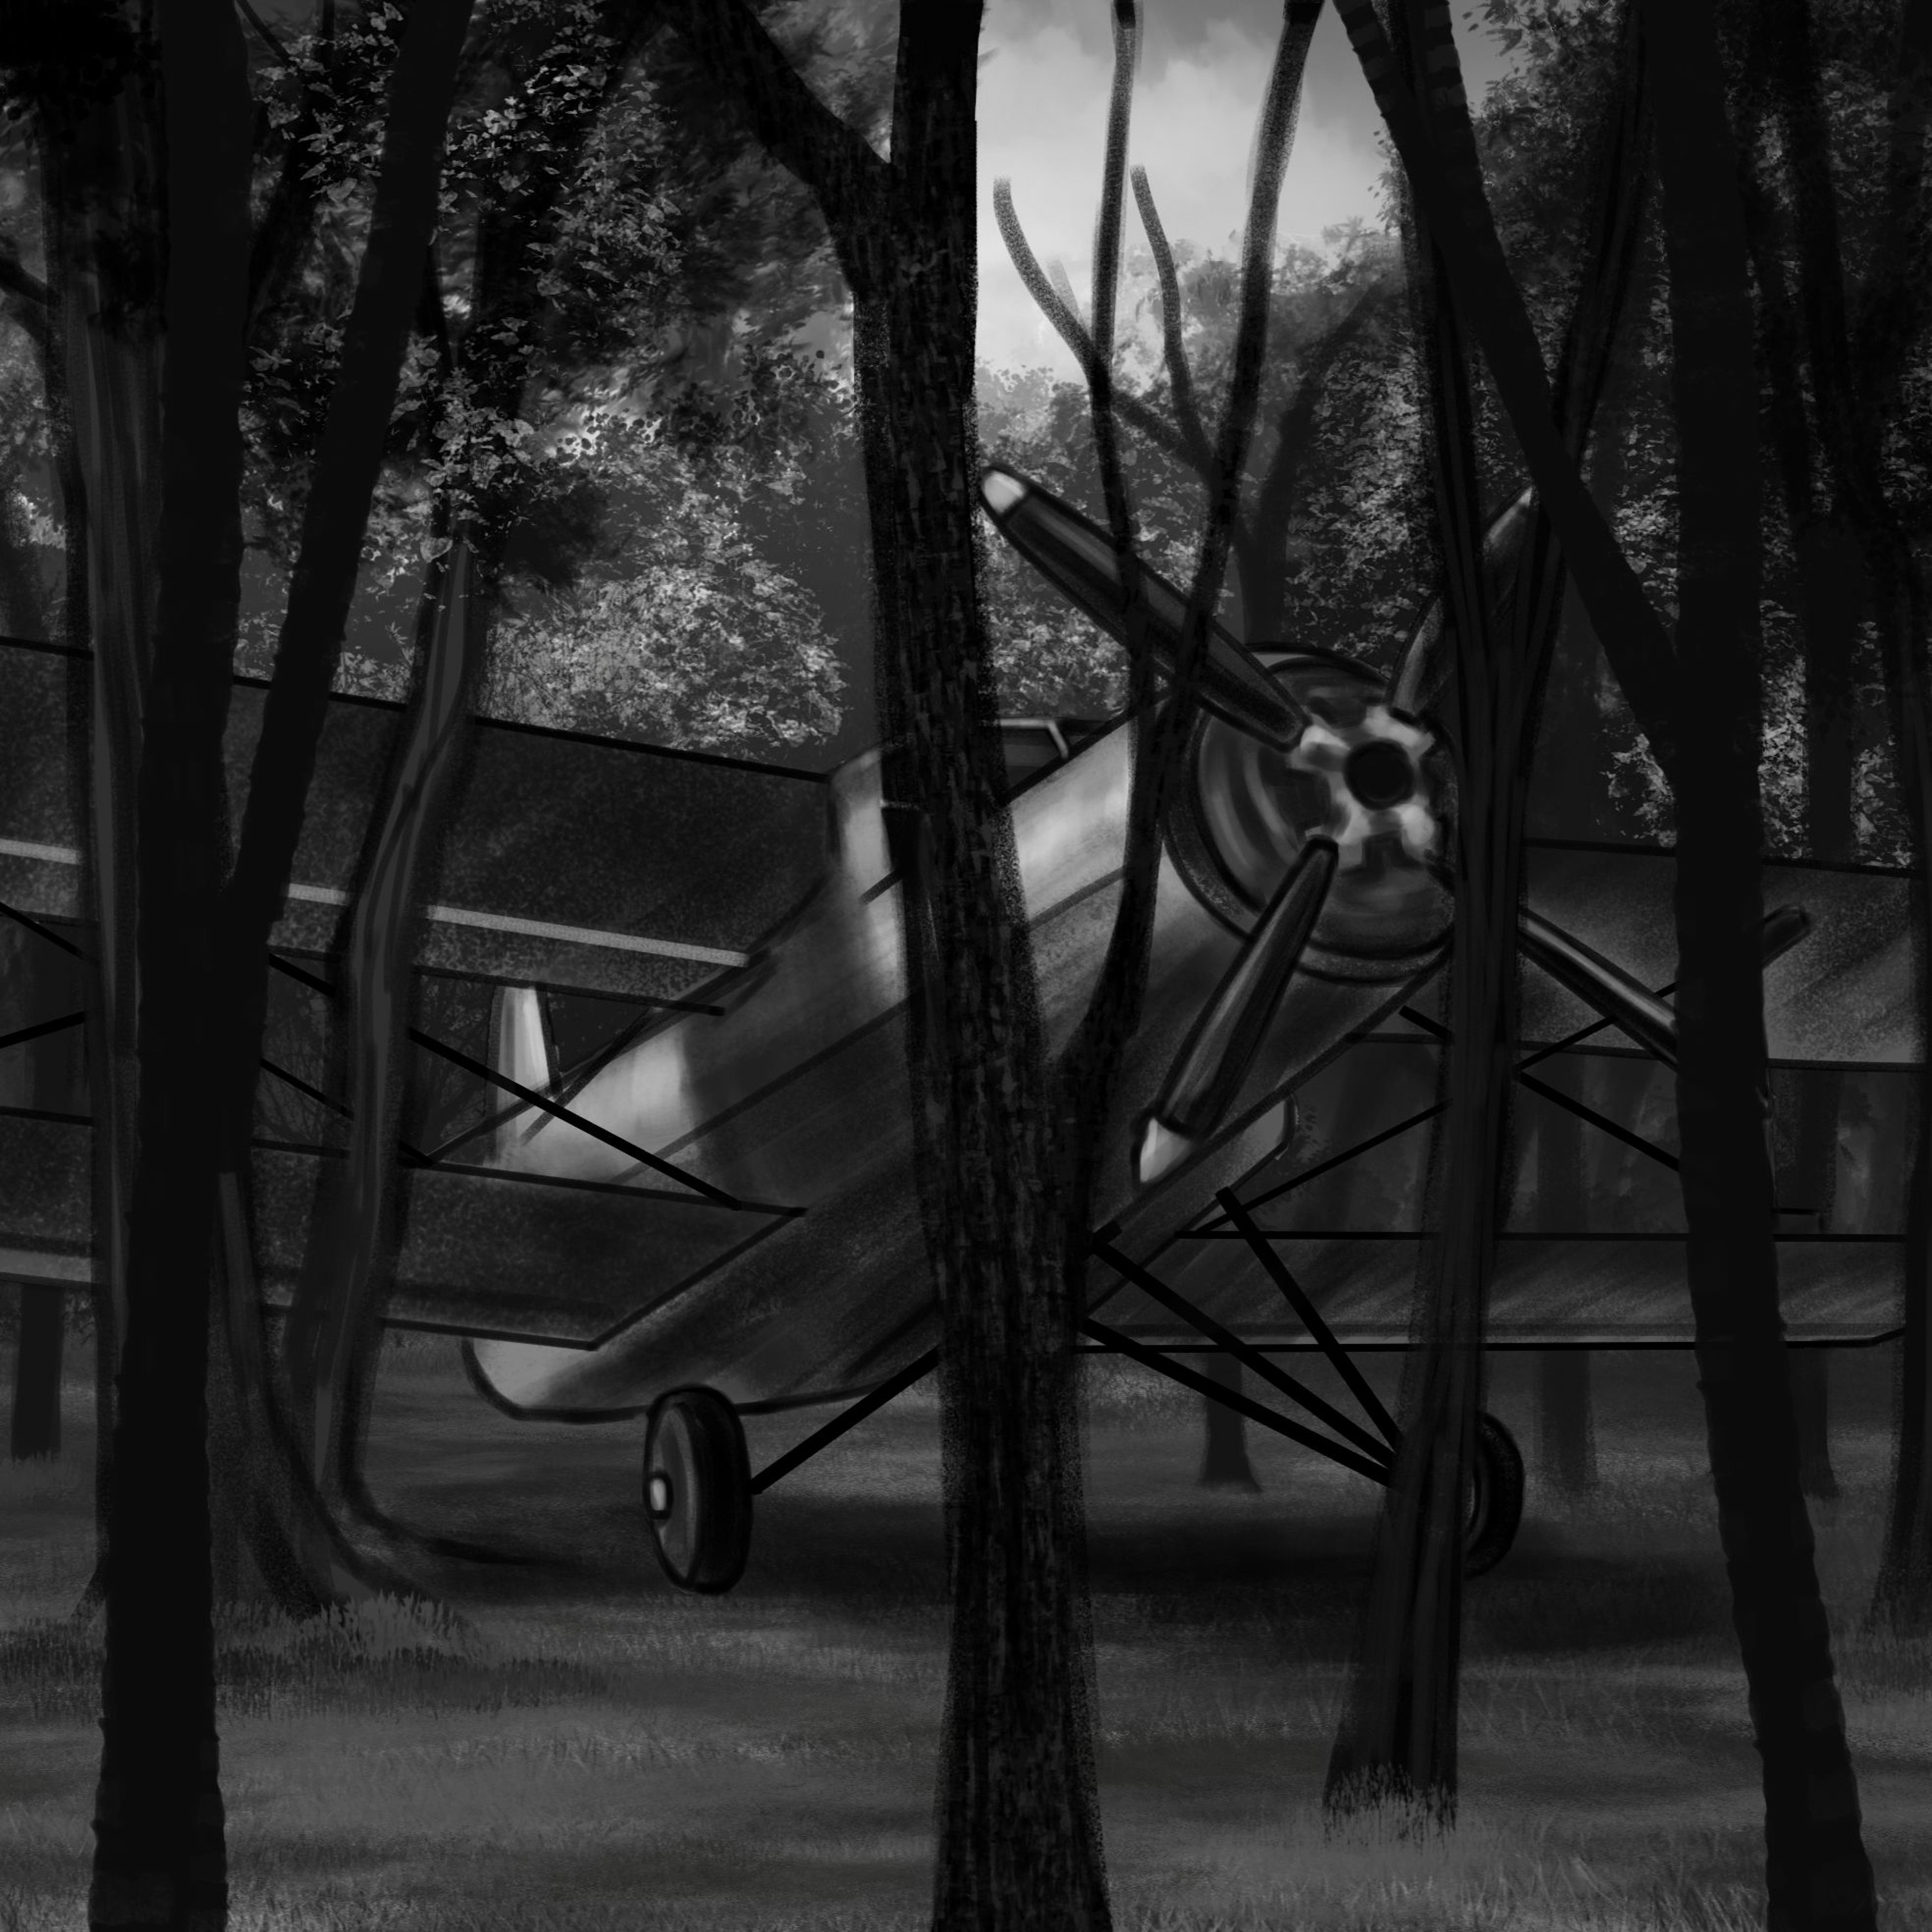 S04E29 - The Plane in the Forest